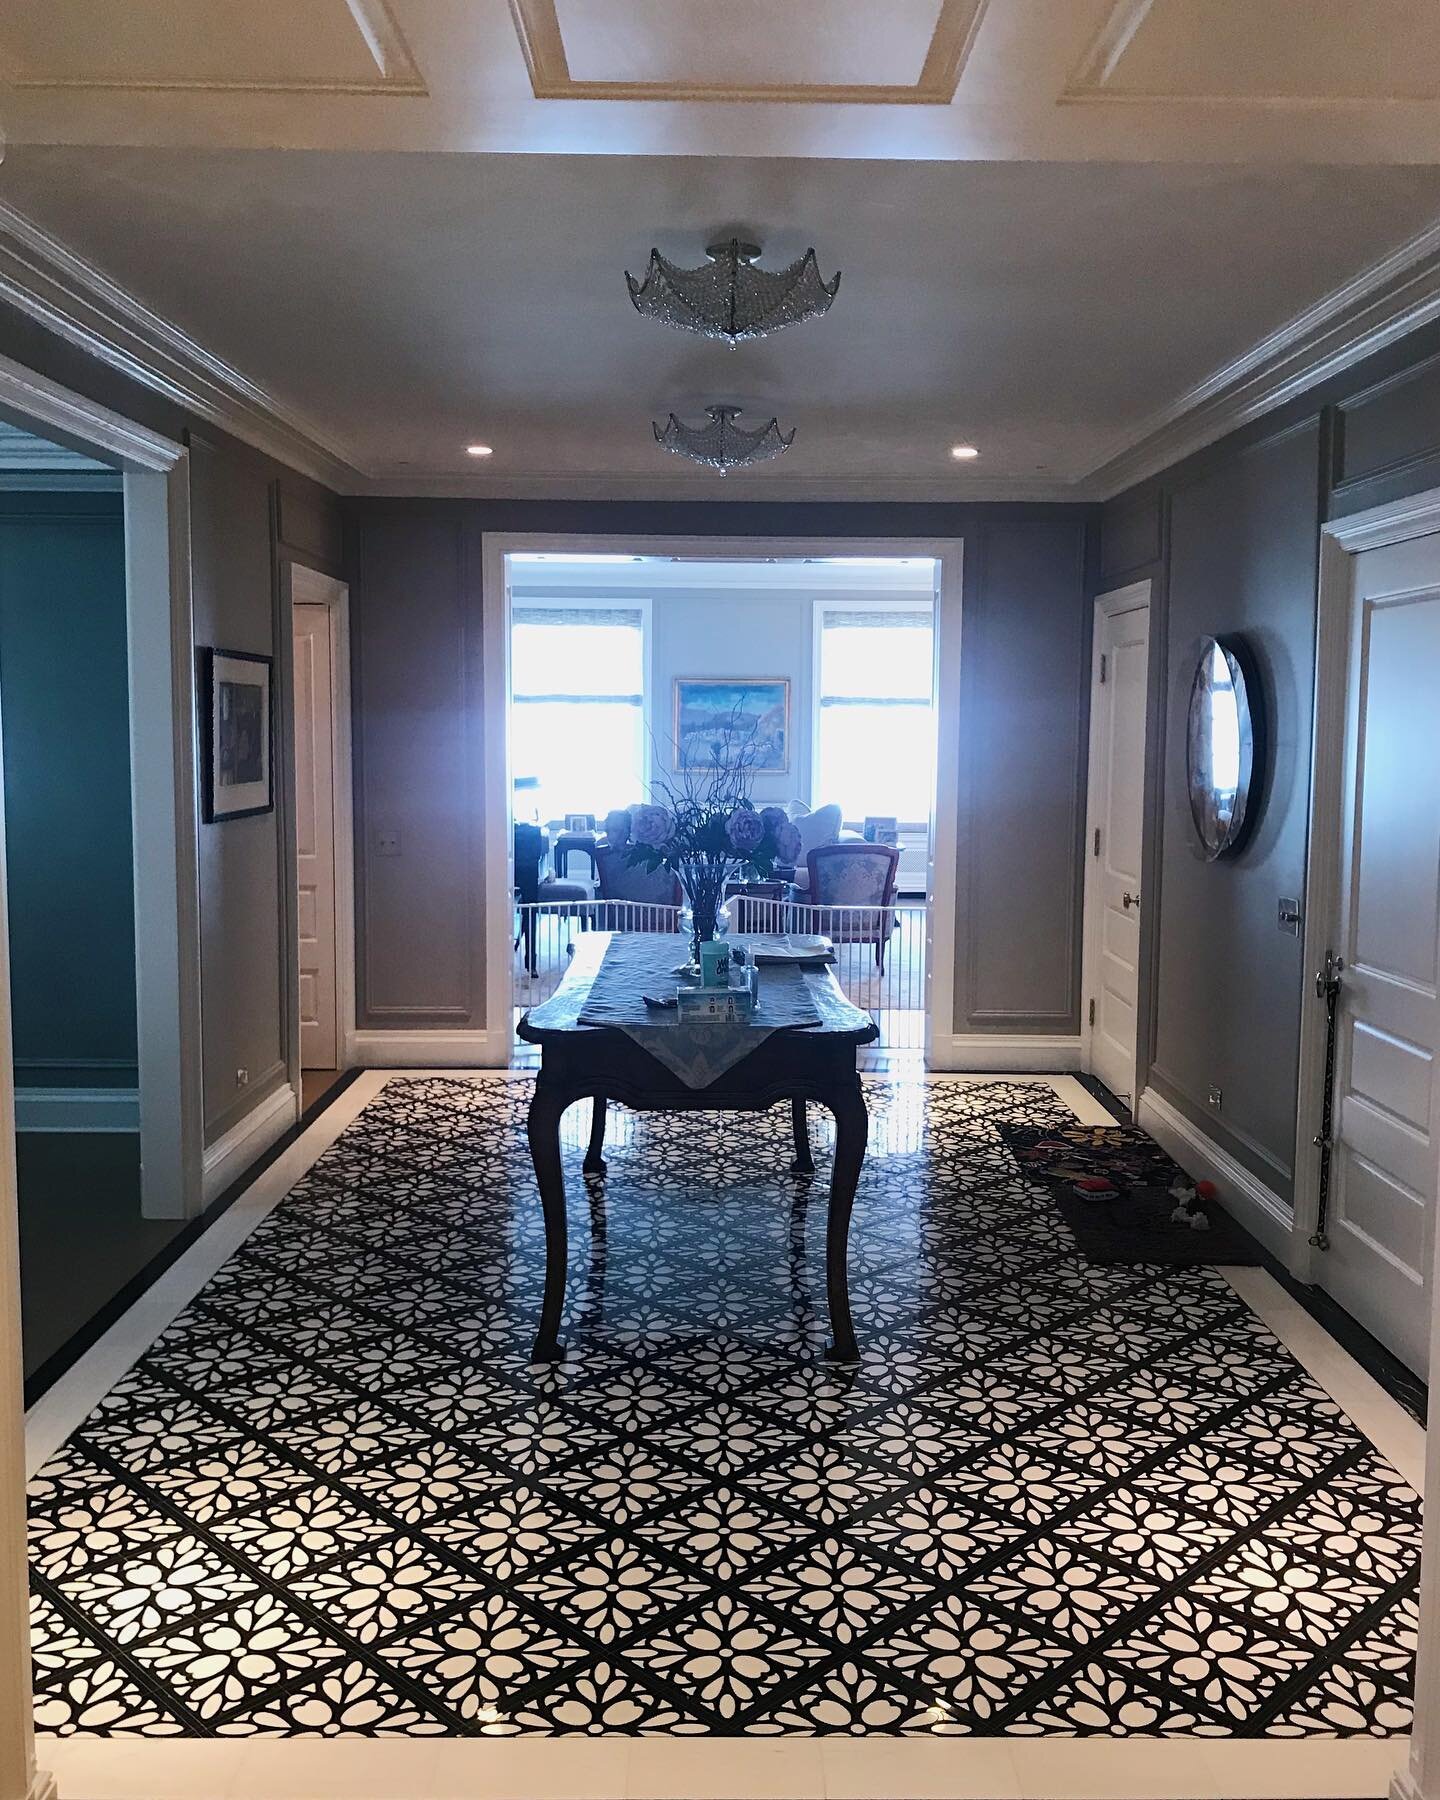 Entry foyer, that tile is incredible! Swipe to see before. This unit was completely gutted. We worked along side a demo crew; they handled the big stuff, while we worked on the finer, selective demo processes
.
.
.
.
.
.
.
#generalcontractorchicago #